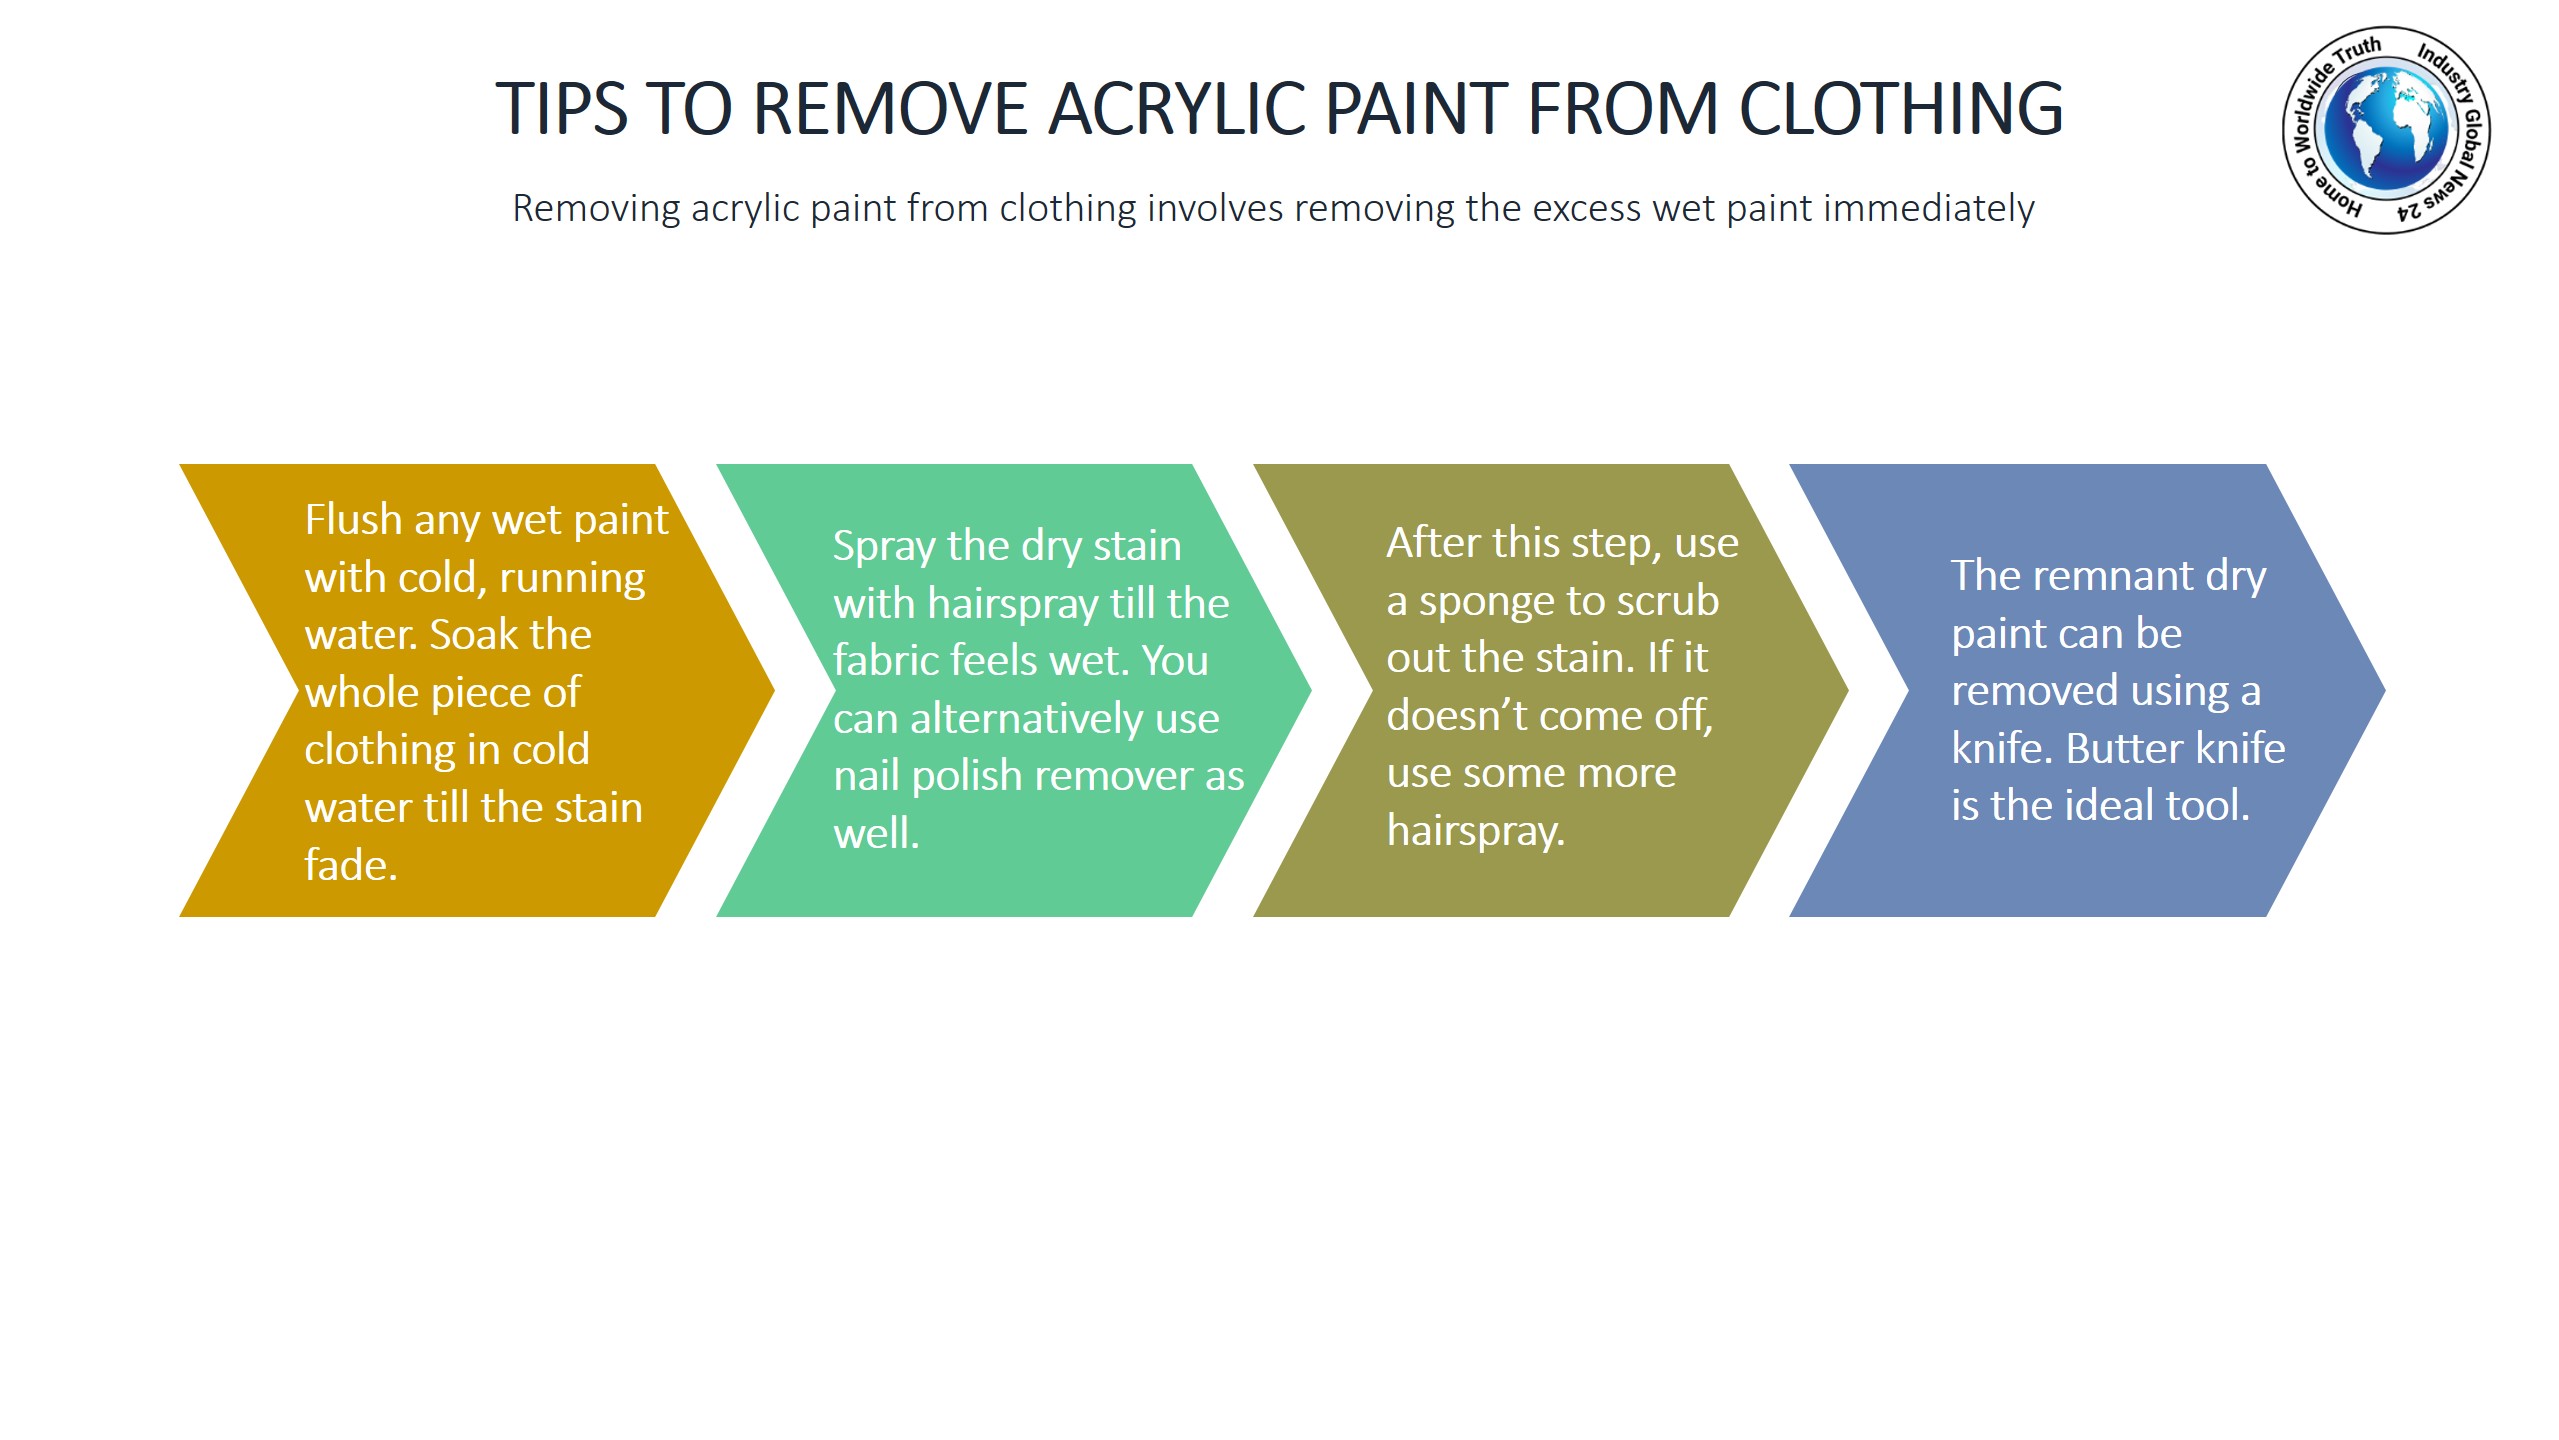 Tips to remove acrylic paint from clothing